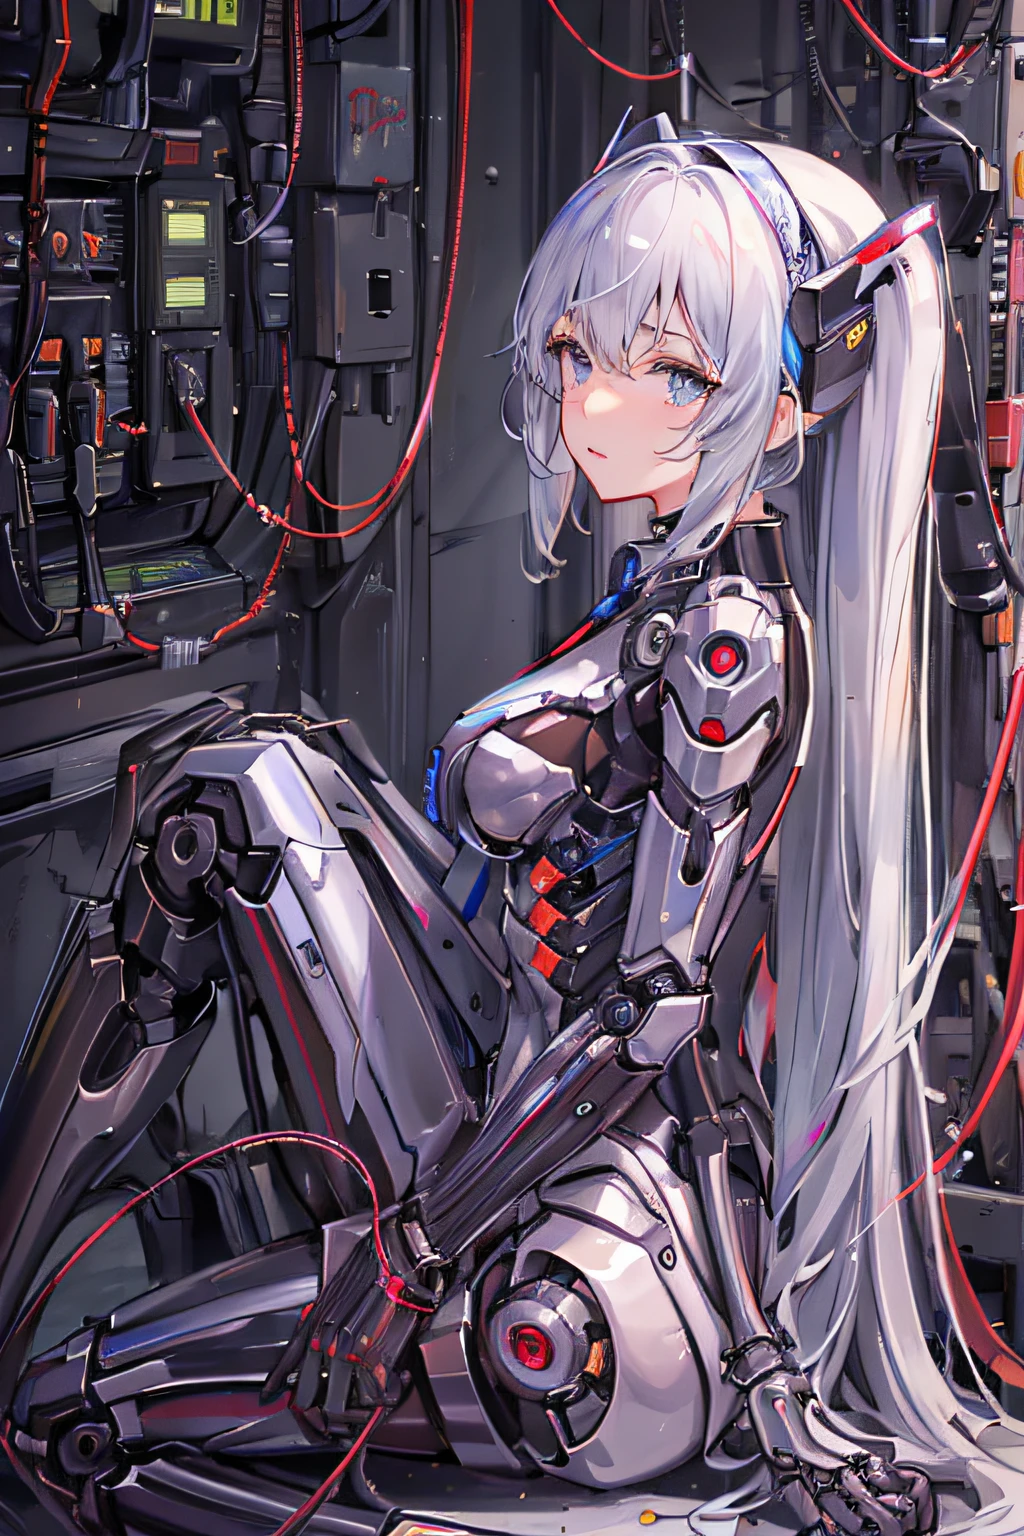 Anime 女孩 sitting on the ground with a robot in front of her, cyborg - 女孩 with silver hair, 生物力学的欧派, Cute cyborg 女孩, Cyborg 女孩, beautiful 女孩 cyborg, 完美的动漫机器人女人, perfect android 女孩, 机器人女孩, 动漫机器人, beutiful white 女孩 cyborg, 全机器人!! 女孩, Cyberpunk anime 女孩 mecha